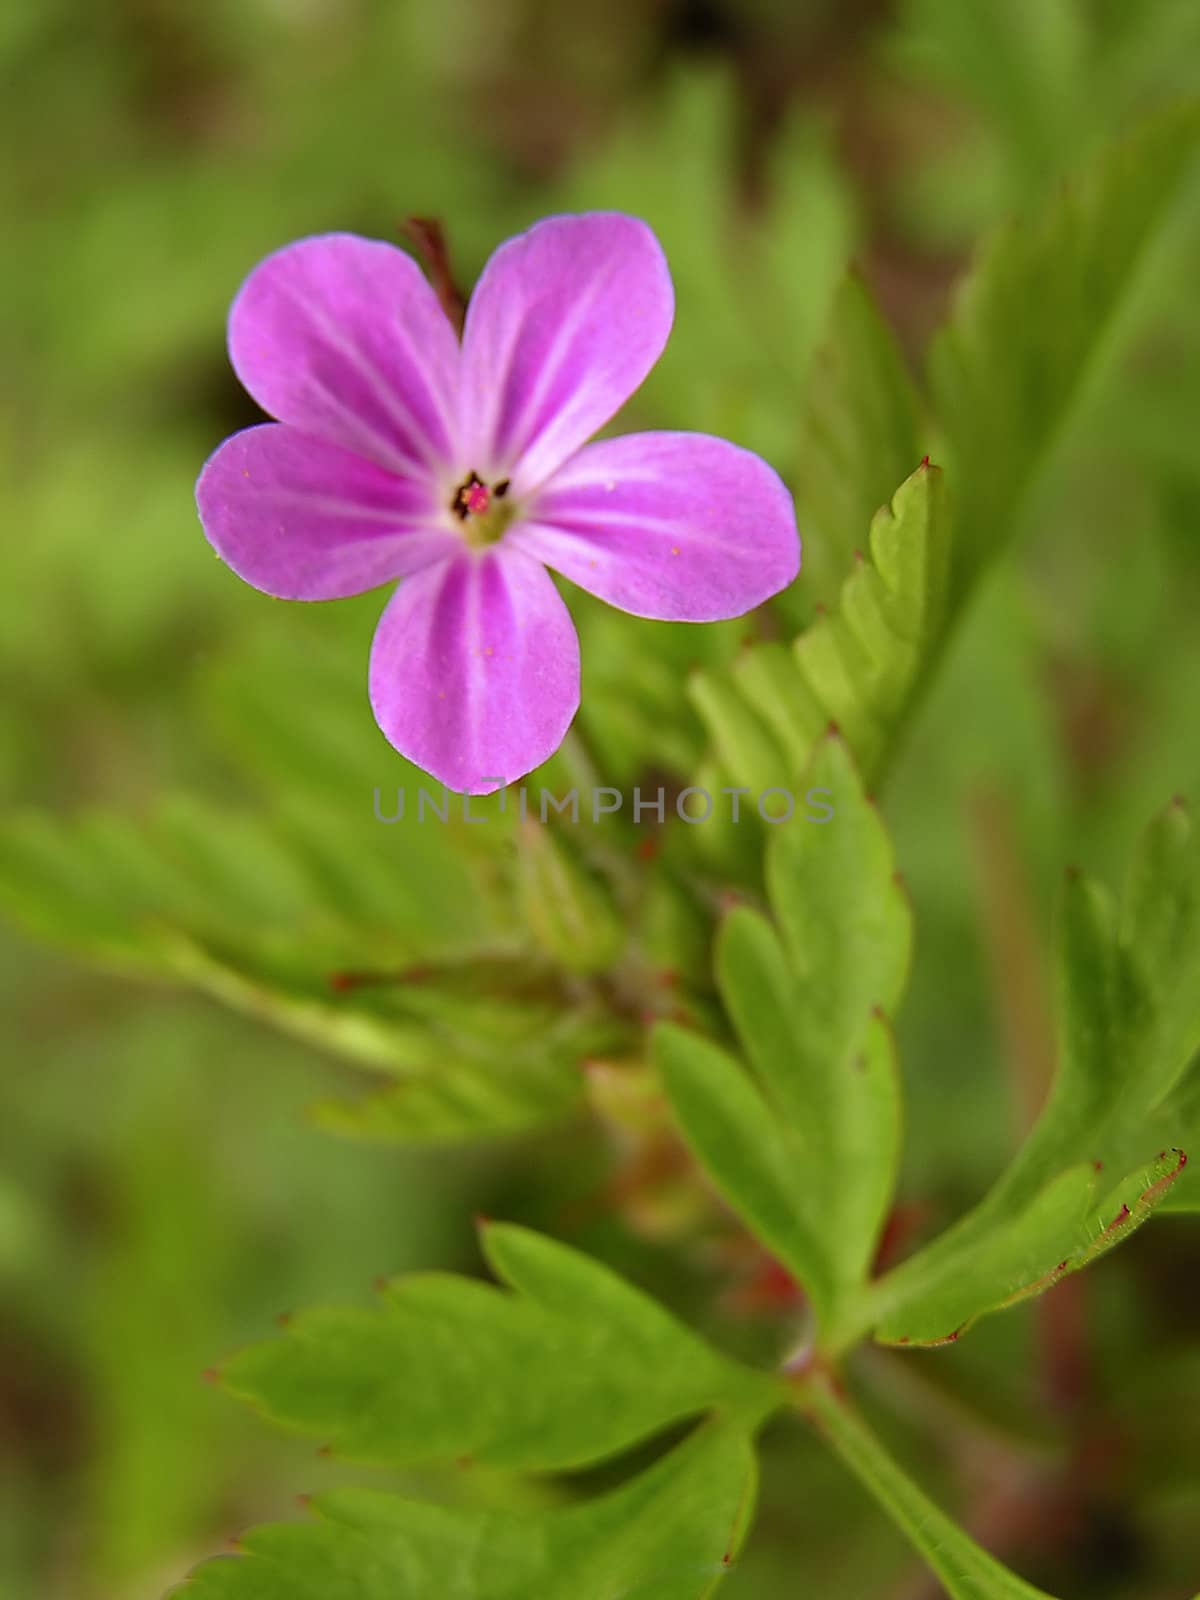 Vivid pink flower in front of green background.